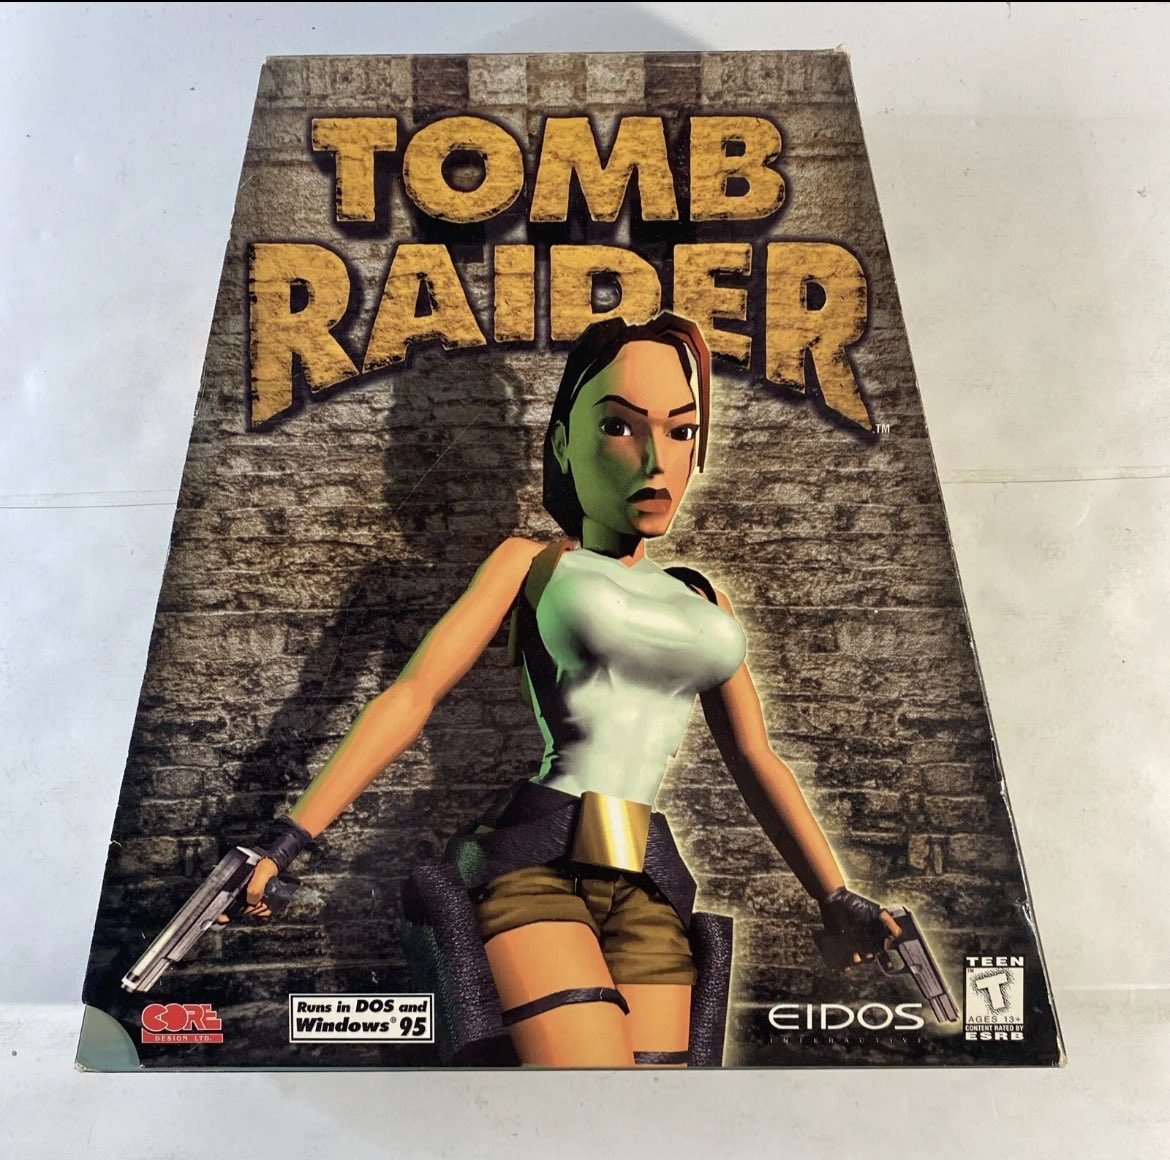 @Michael_French My first thought was it’s a reference to the old Tomb Raider big box PC games